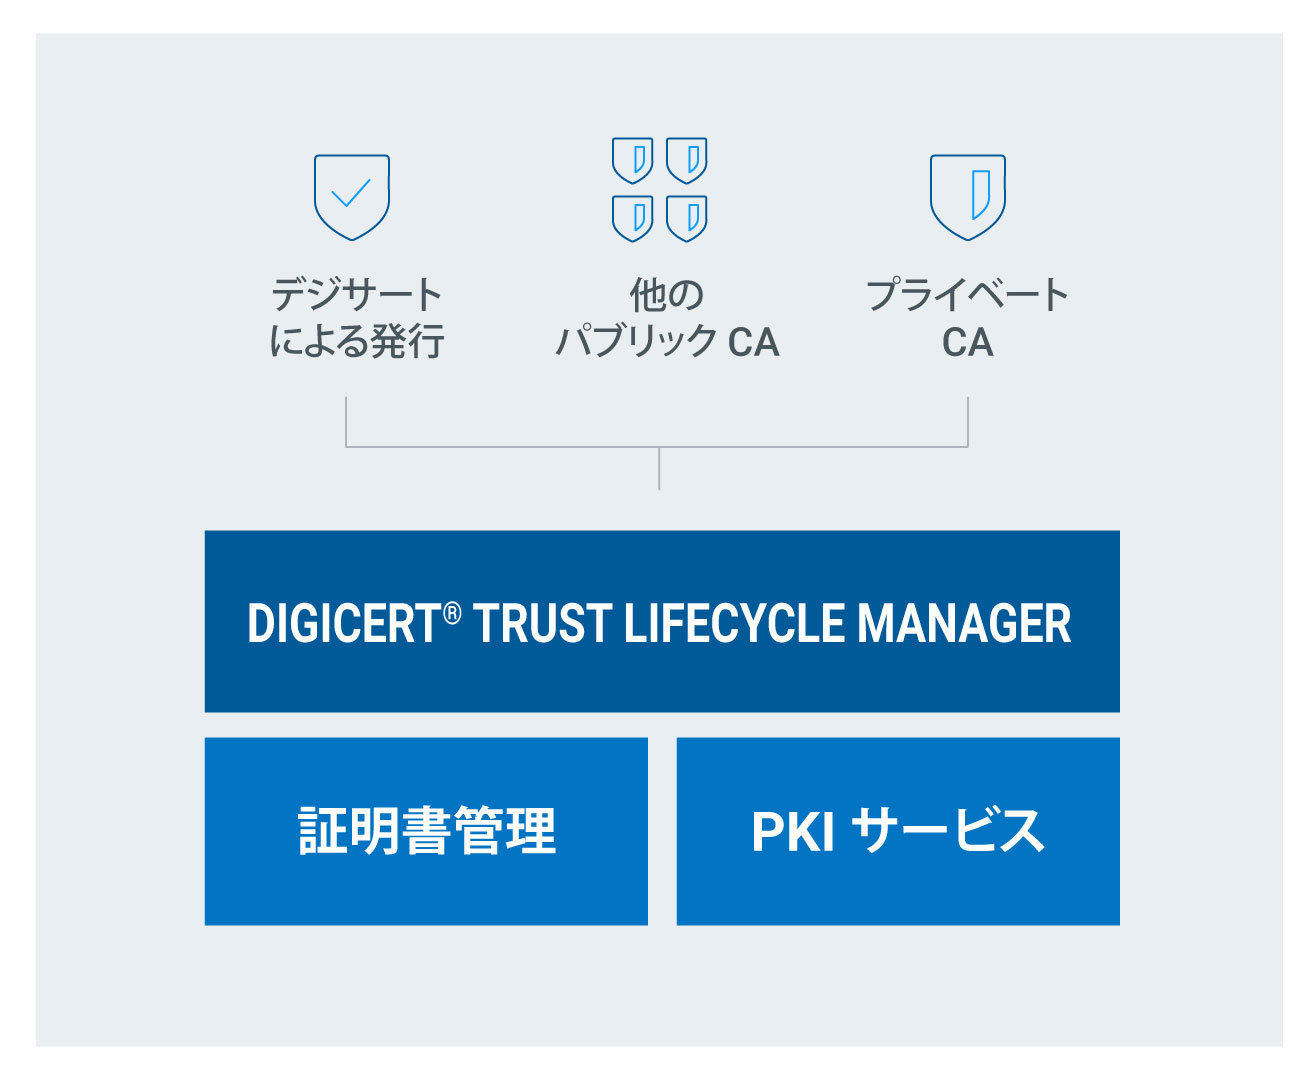 DigiCert Trust Lifecycle Manager